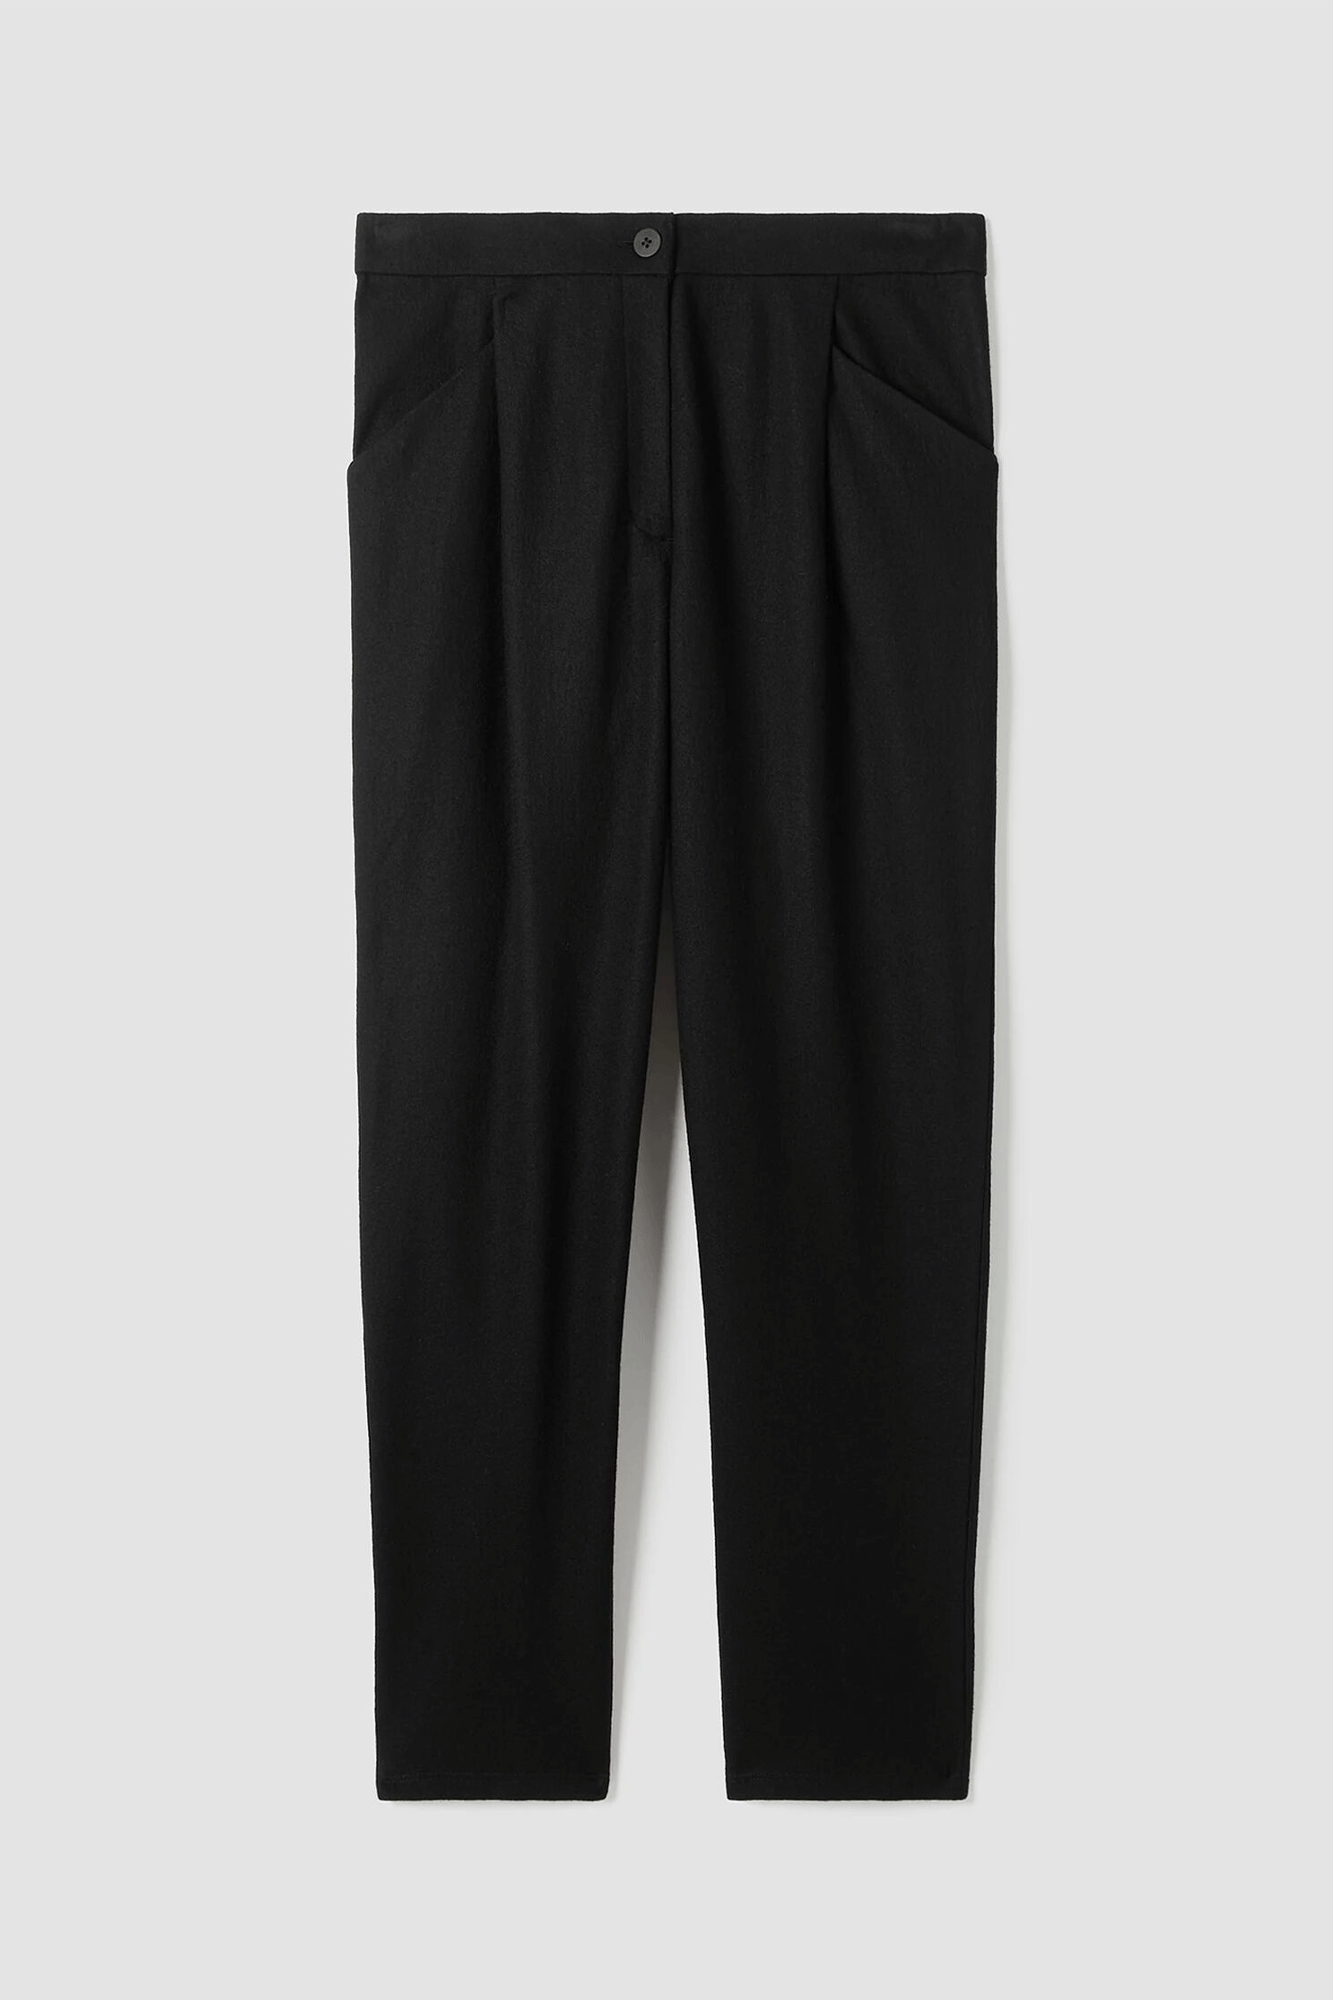 Experience modern style and luxurious comfort with the Pleated Taper Ankle Trouser. Adorned with a fly front closure, this pant is crafted from a sweater-soft boiled wool knit fabric. Update your wardrobe with this timeless classic!